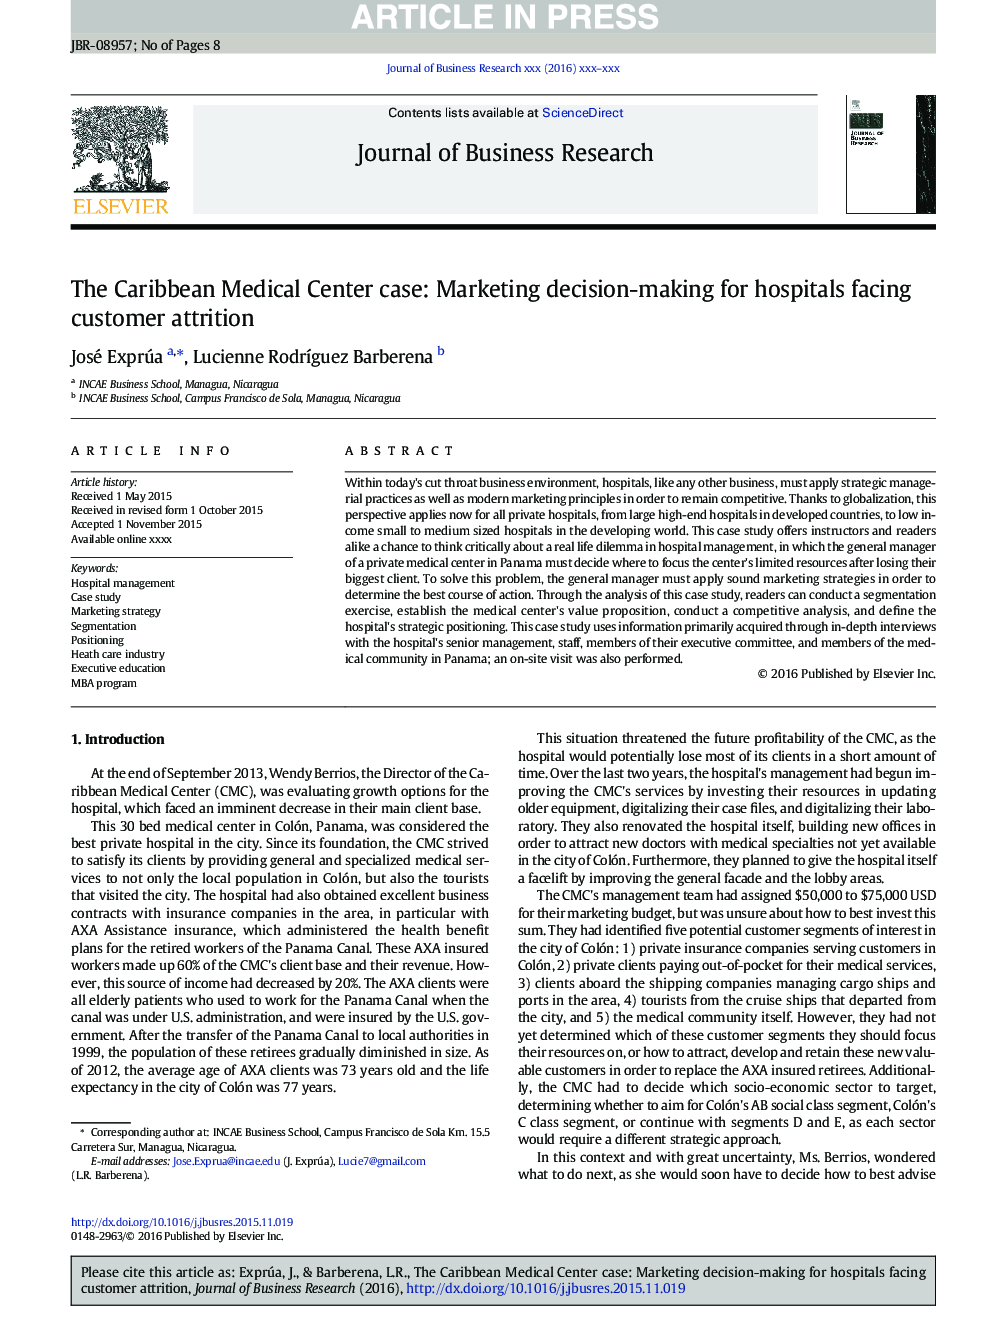 The Caribbean Medical Center case: Marketing decision-making for hospitals facing customer attrition